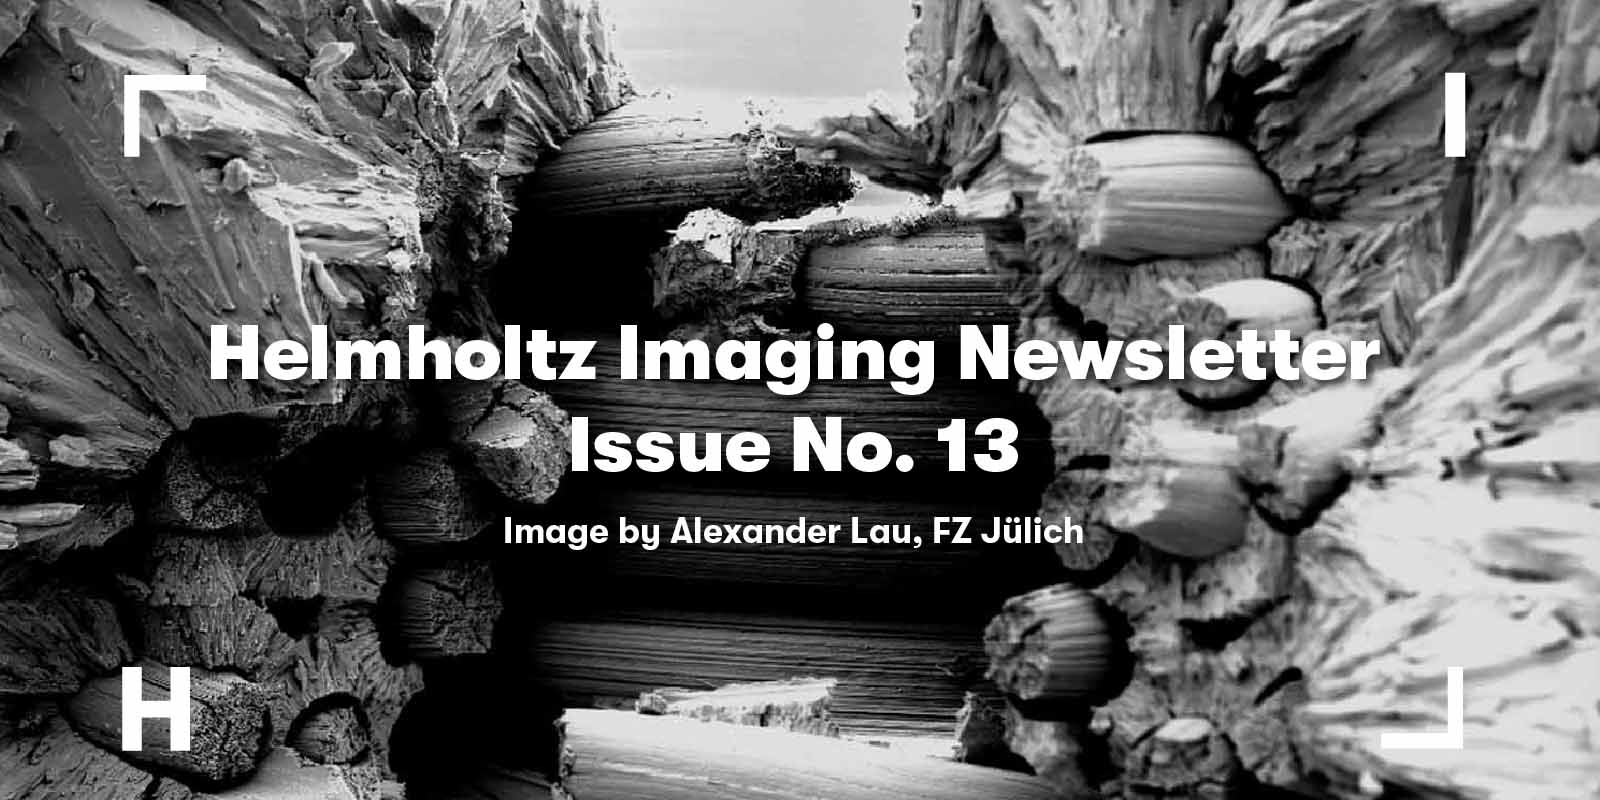 Decorative image to promote the most recent Helmholtz Imaging Newsletter